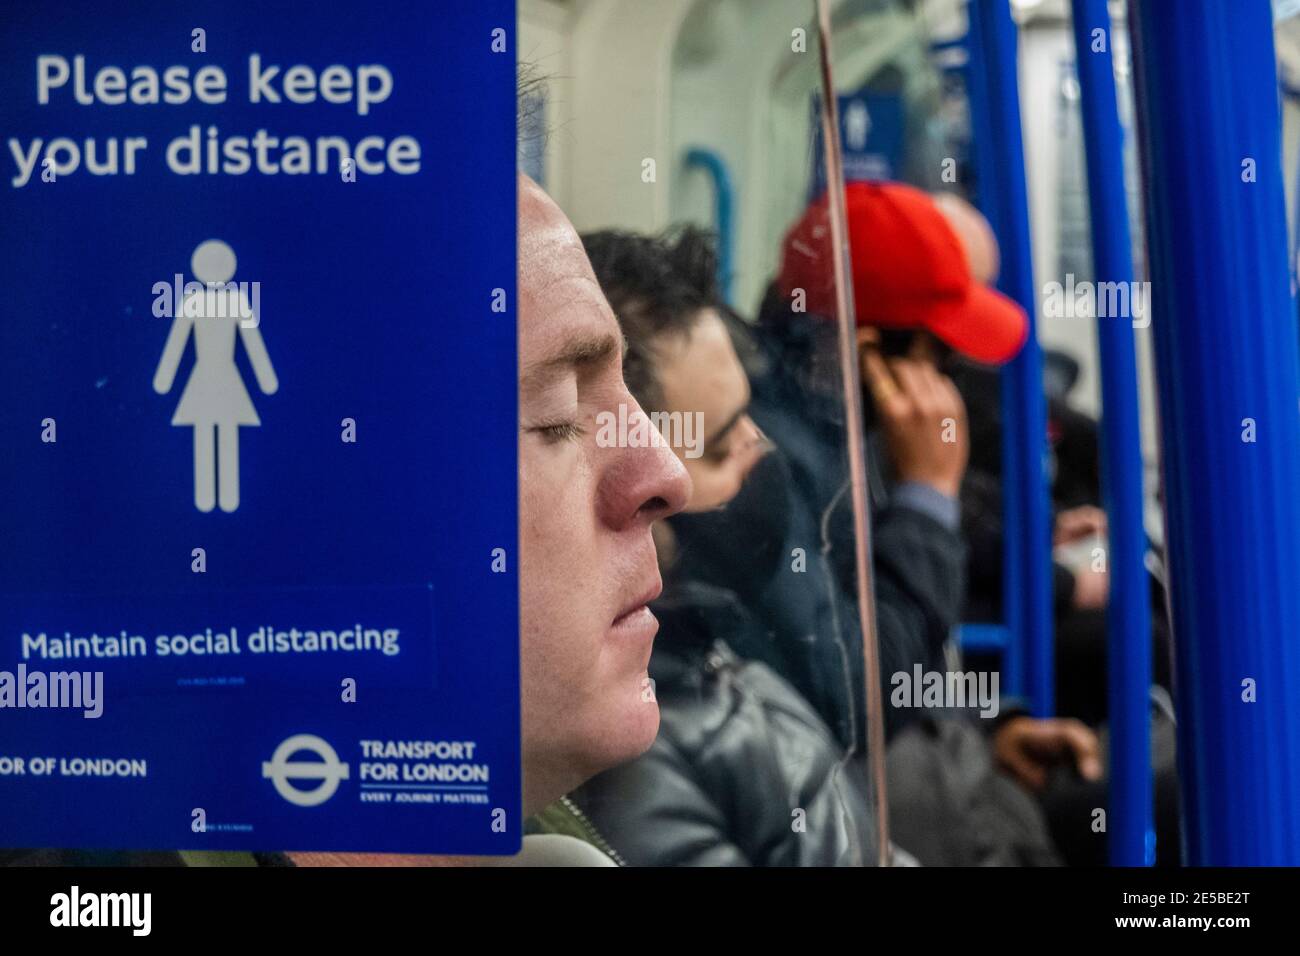 London, UK. 27th Jan, 2021. Despite passing 100,000 deaths there are still people not wearing masks, although possibly they have a valid reason! The underground is still fairly busy despite the new national Lockdown, Stay at Home, instructions. Most travellers wear masks as they are already mandatory. Credit: Guy Bell/Alamy Live News Stock Photo